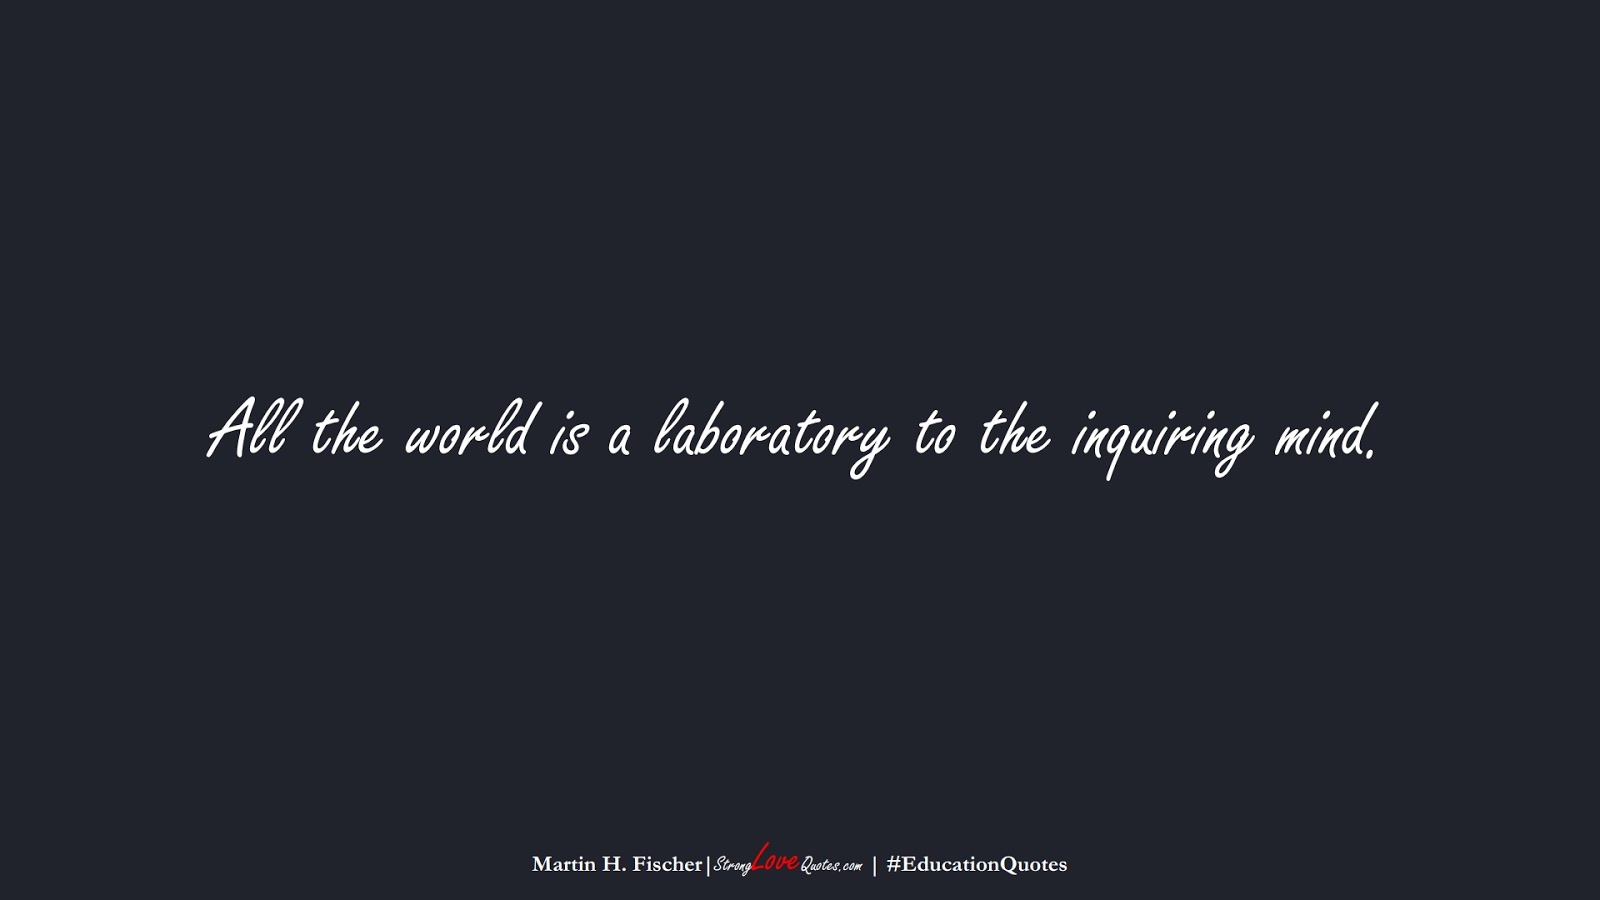 All the world is a laboratory to the inquiring mind. (Martin H. Fischer);  #EducationQuotes